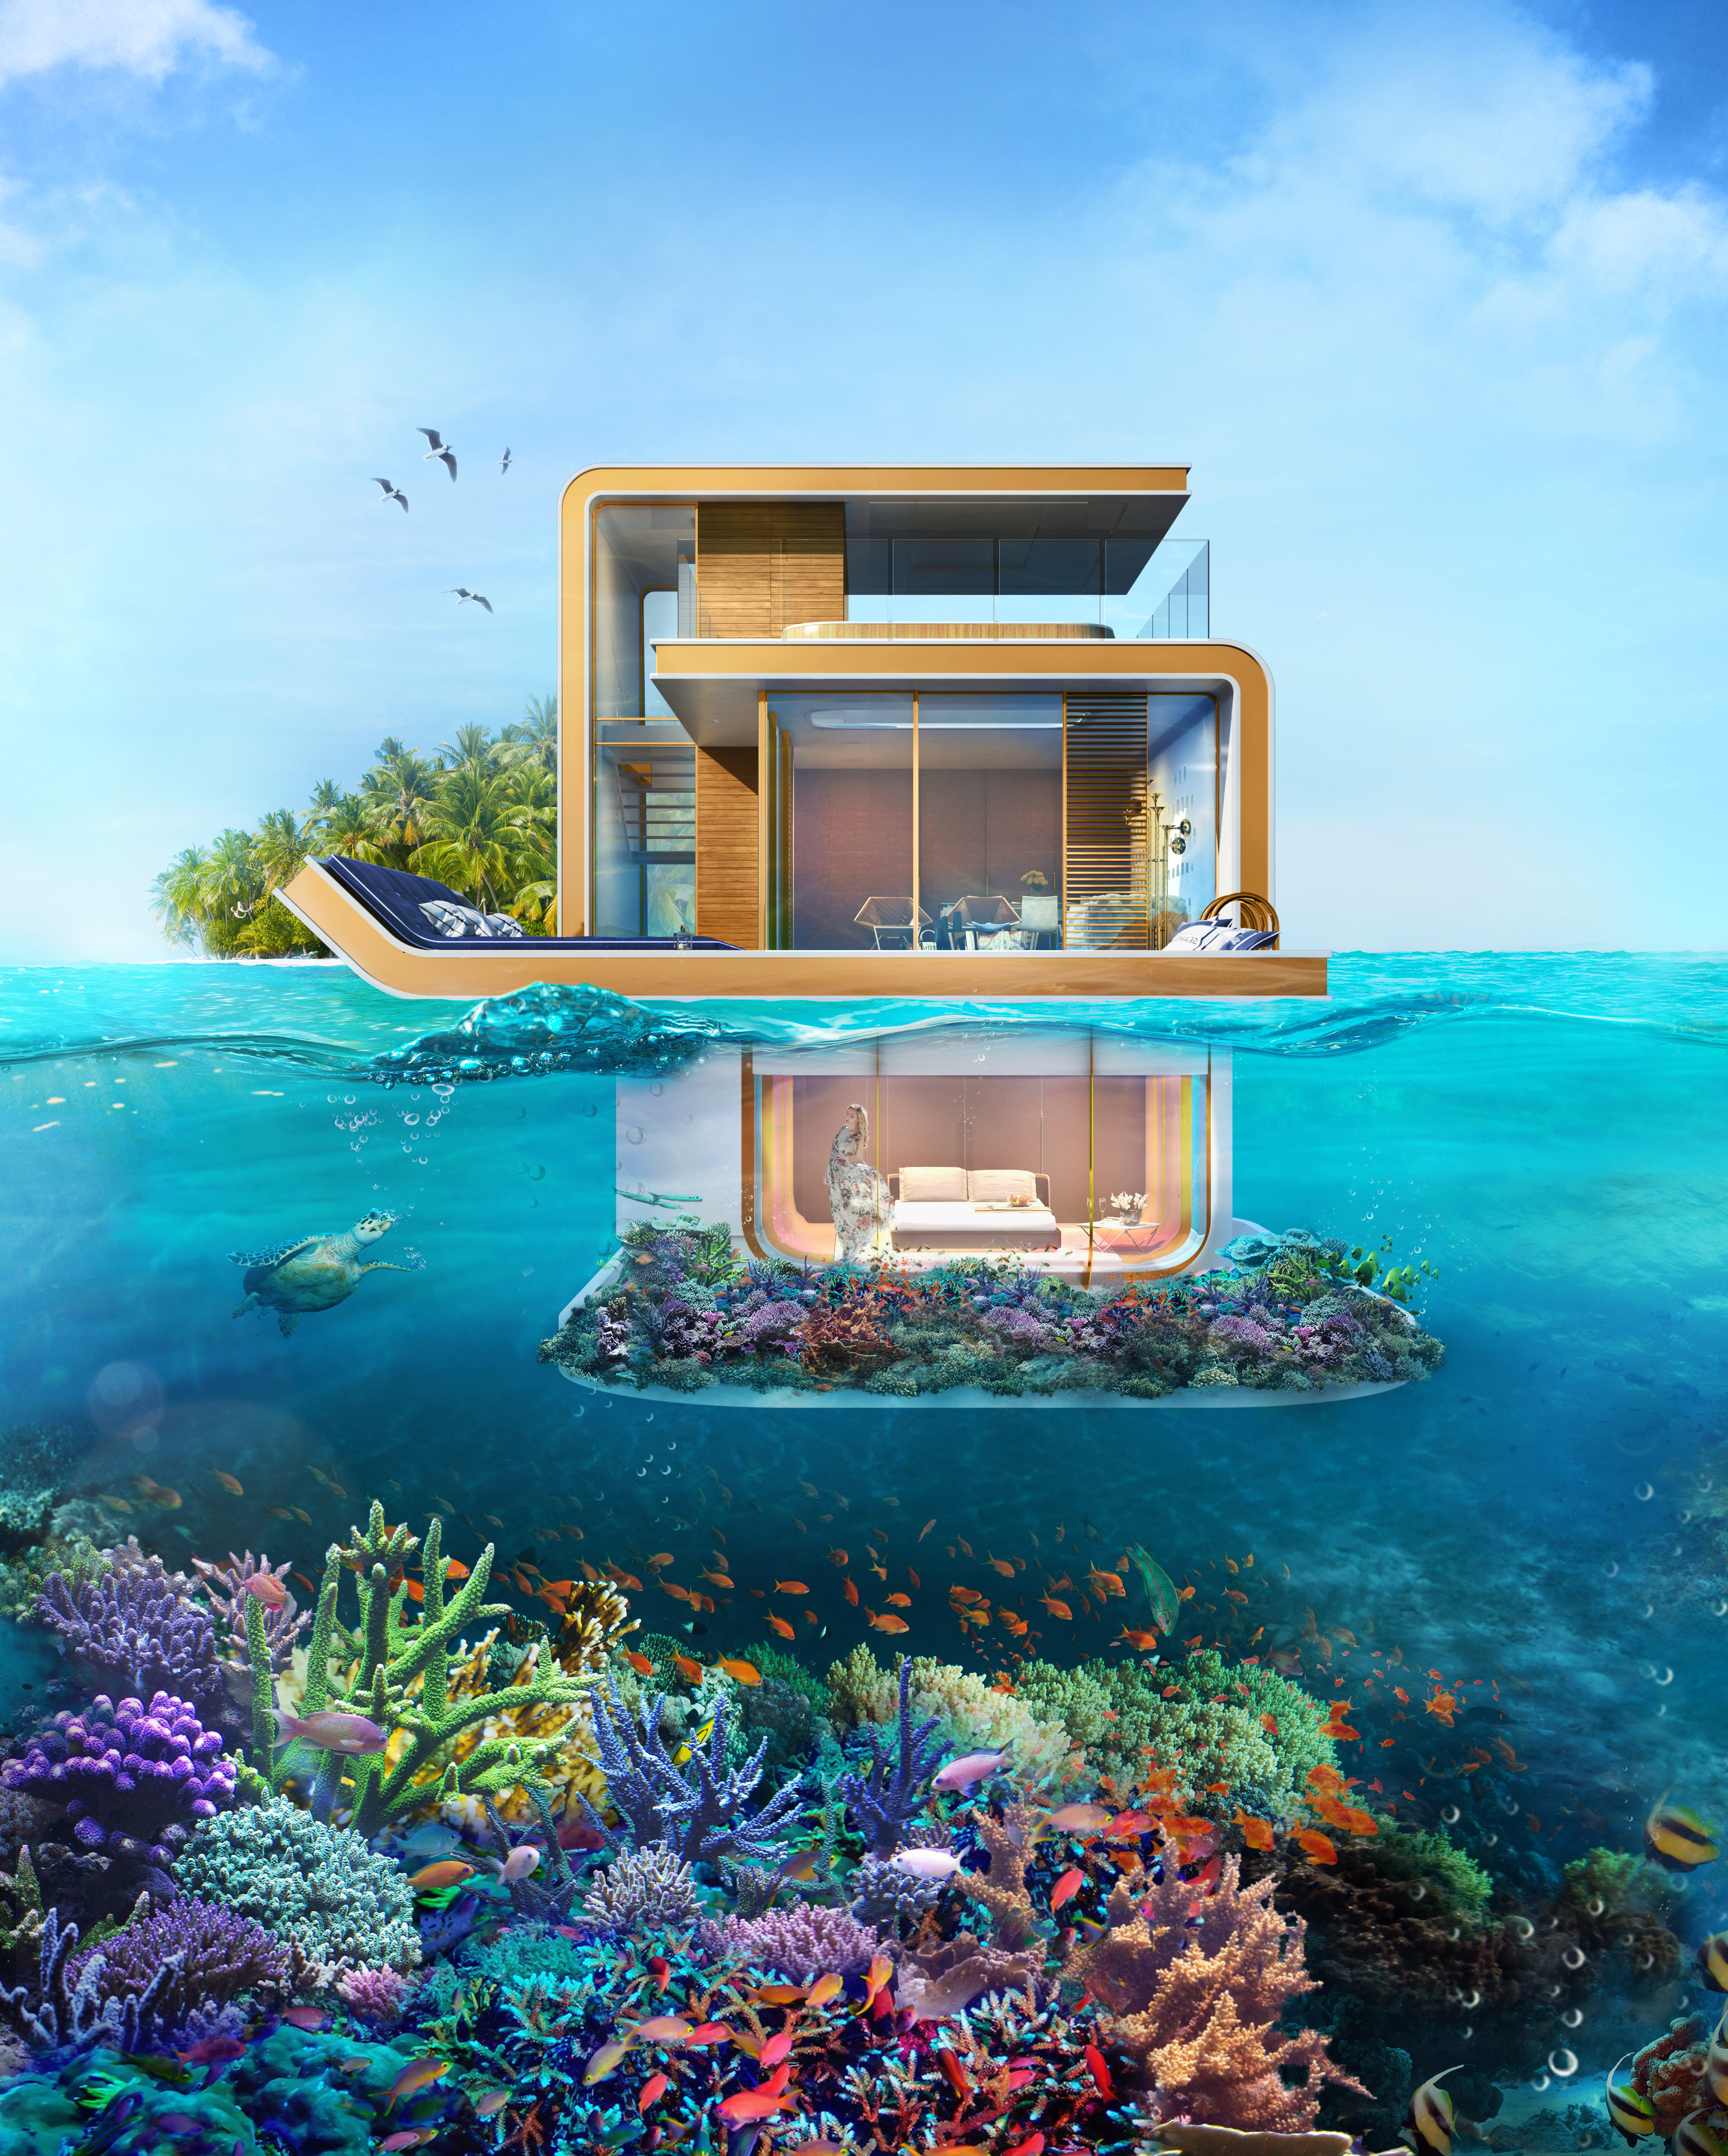 The Floating Seahorse House